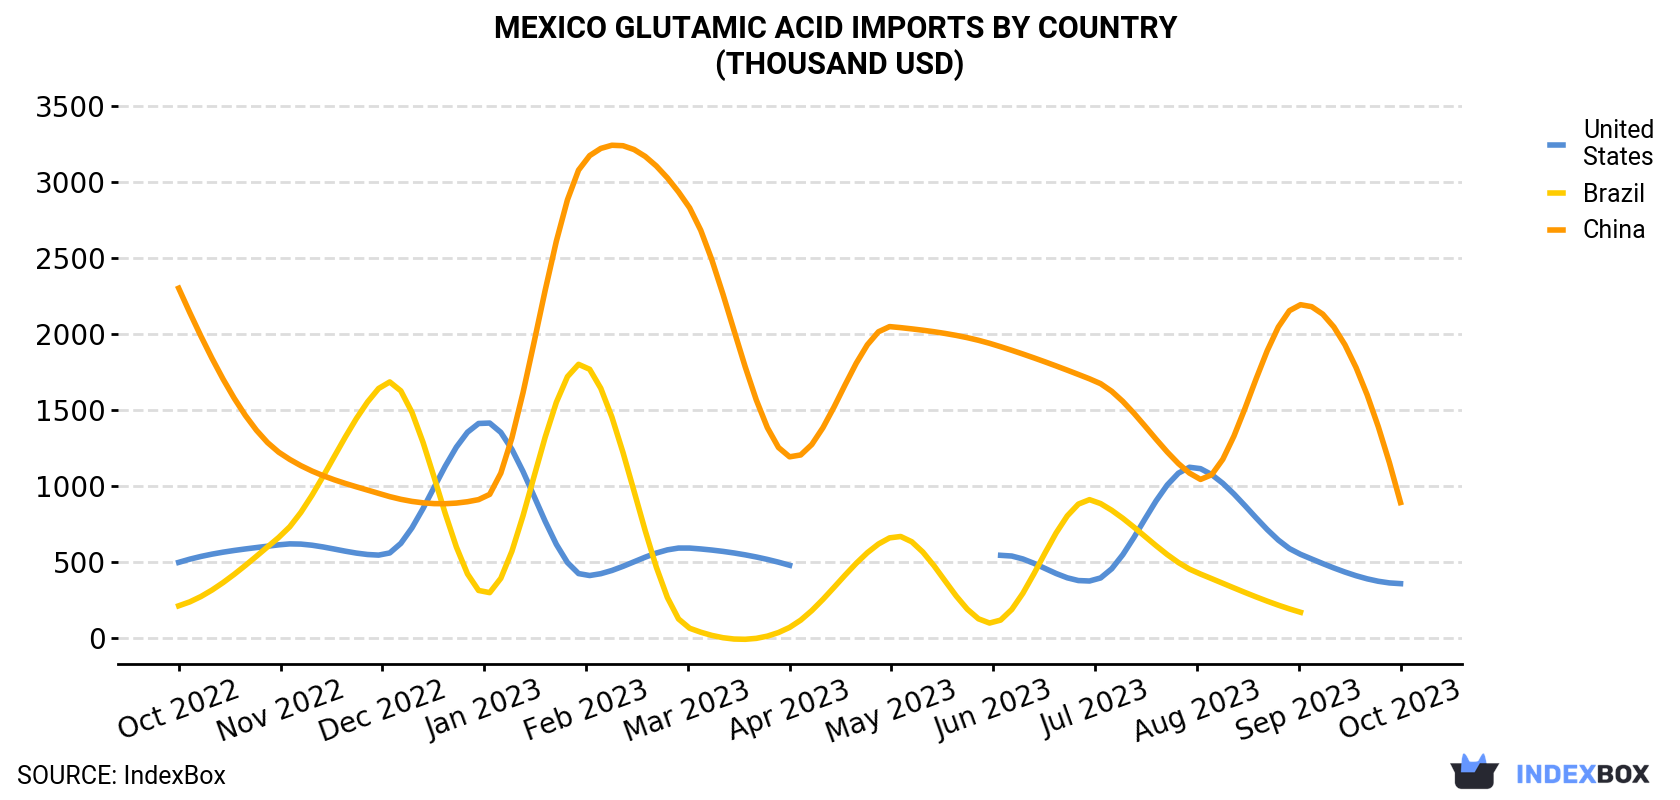 Mexico Glutamic Acid Imports By Country (Thousand USD)